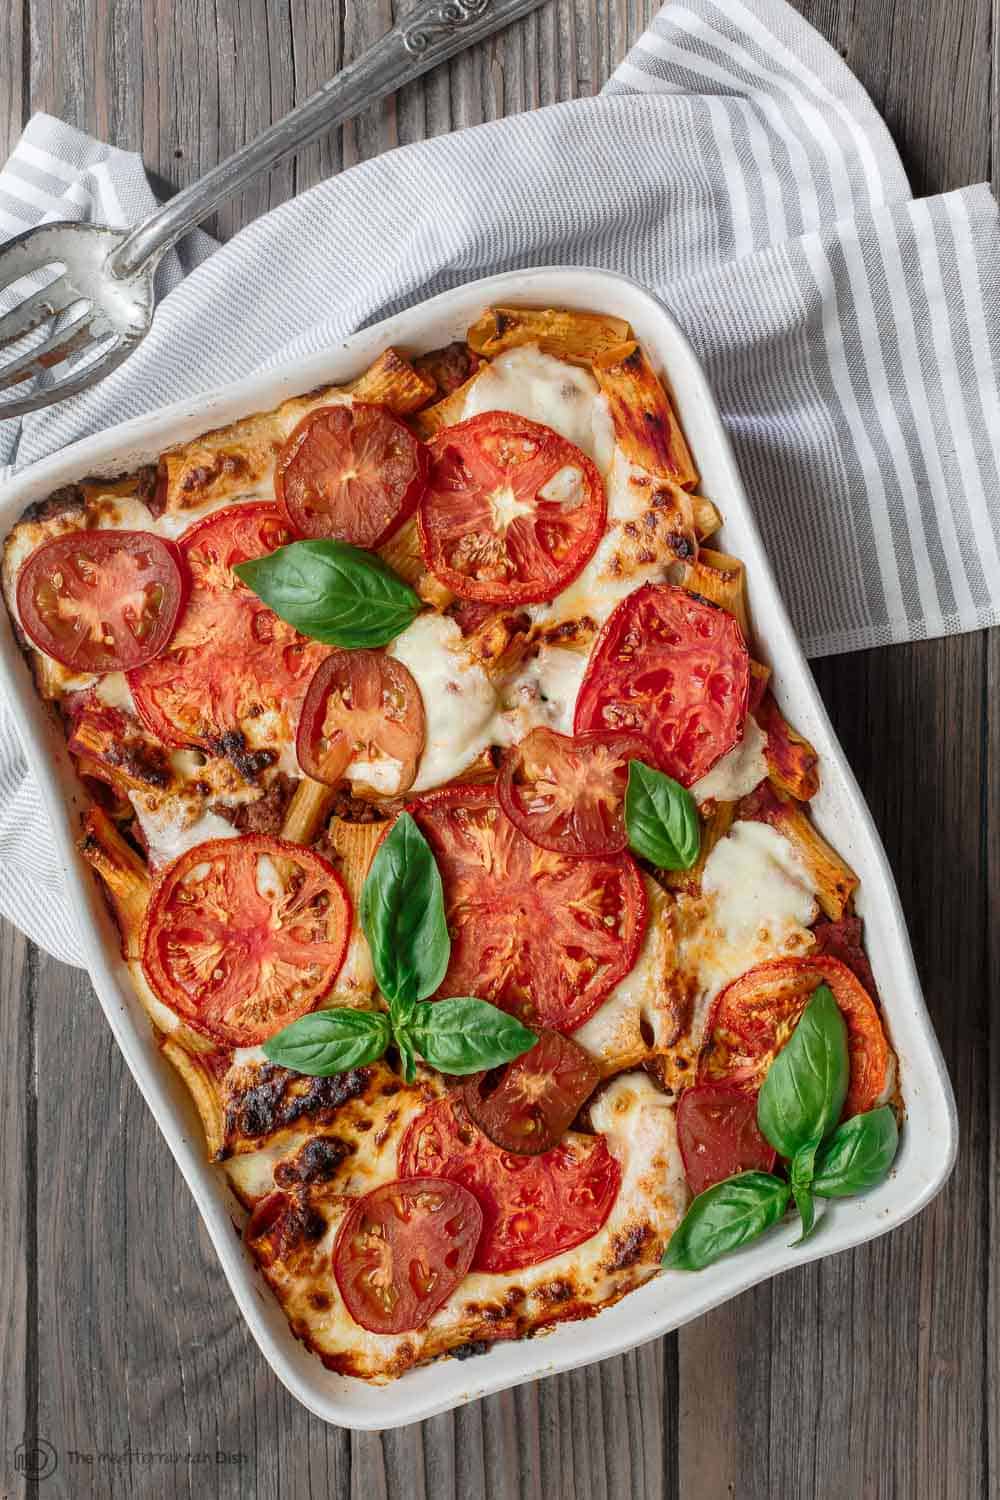 rigatoni pasta in a baking dish, topped with cheese, tomato slices and fresh basil